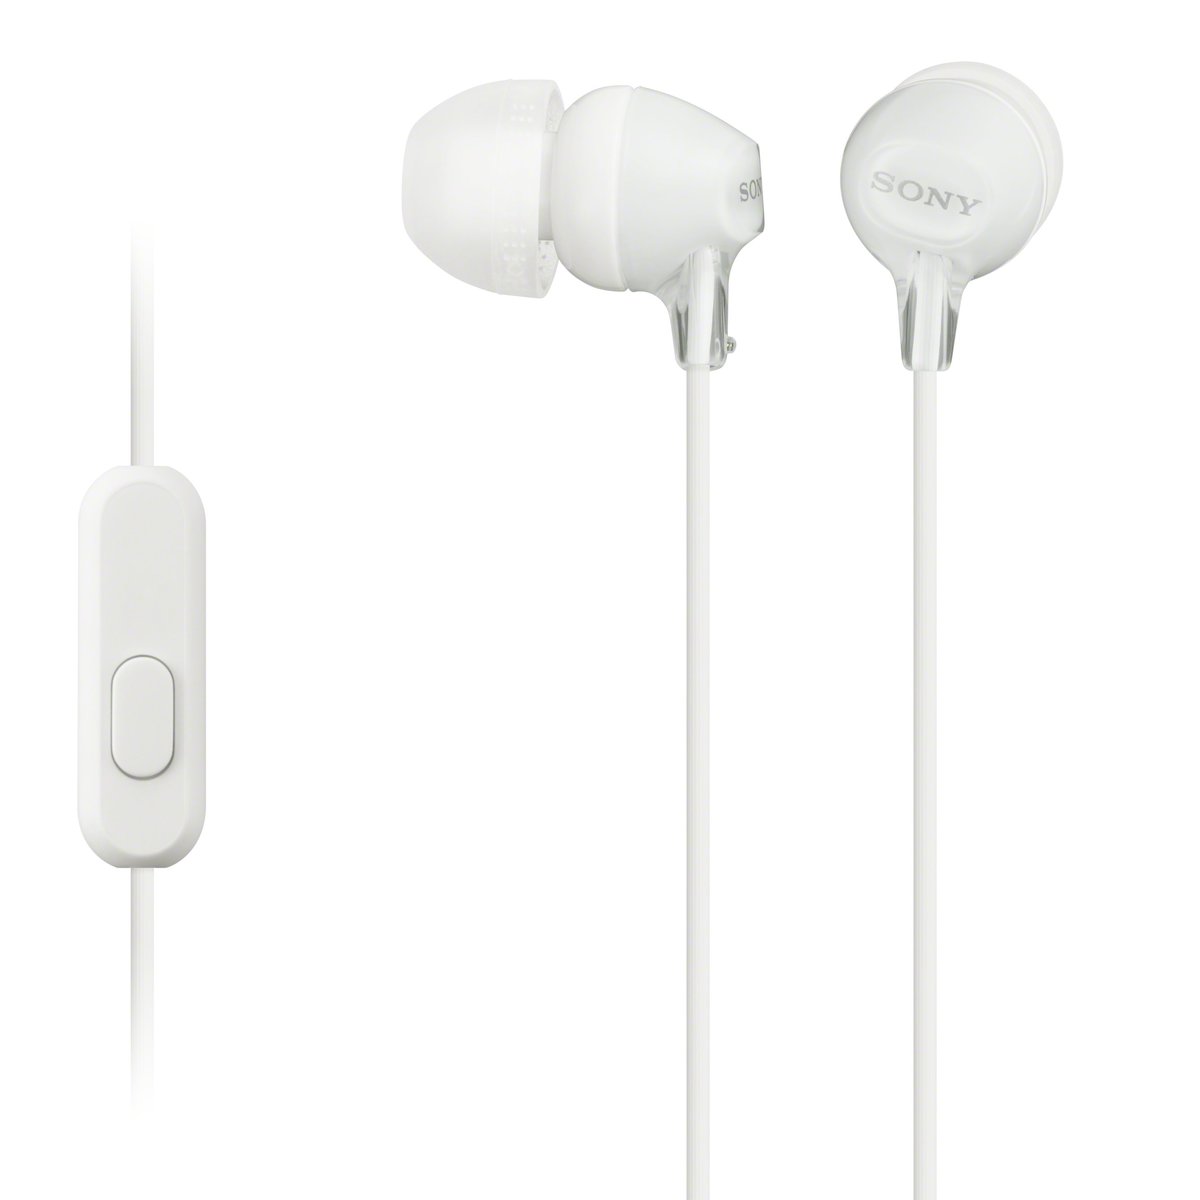 Sony MDR-EX15AP Wired In-ear Headphones with Microphone (White)